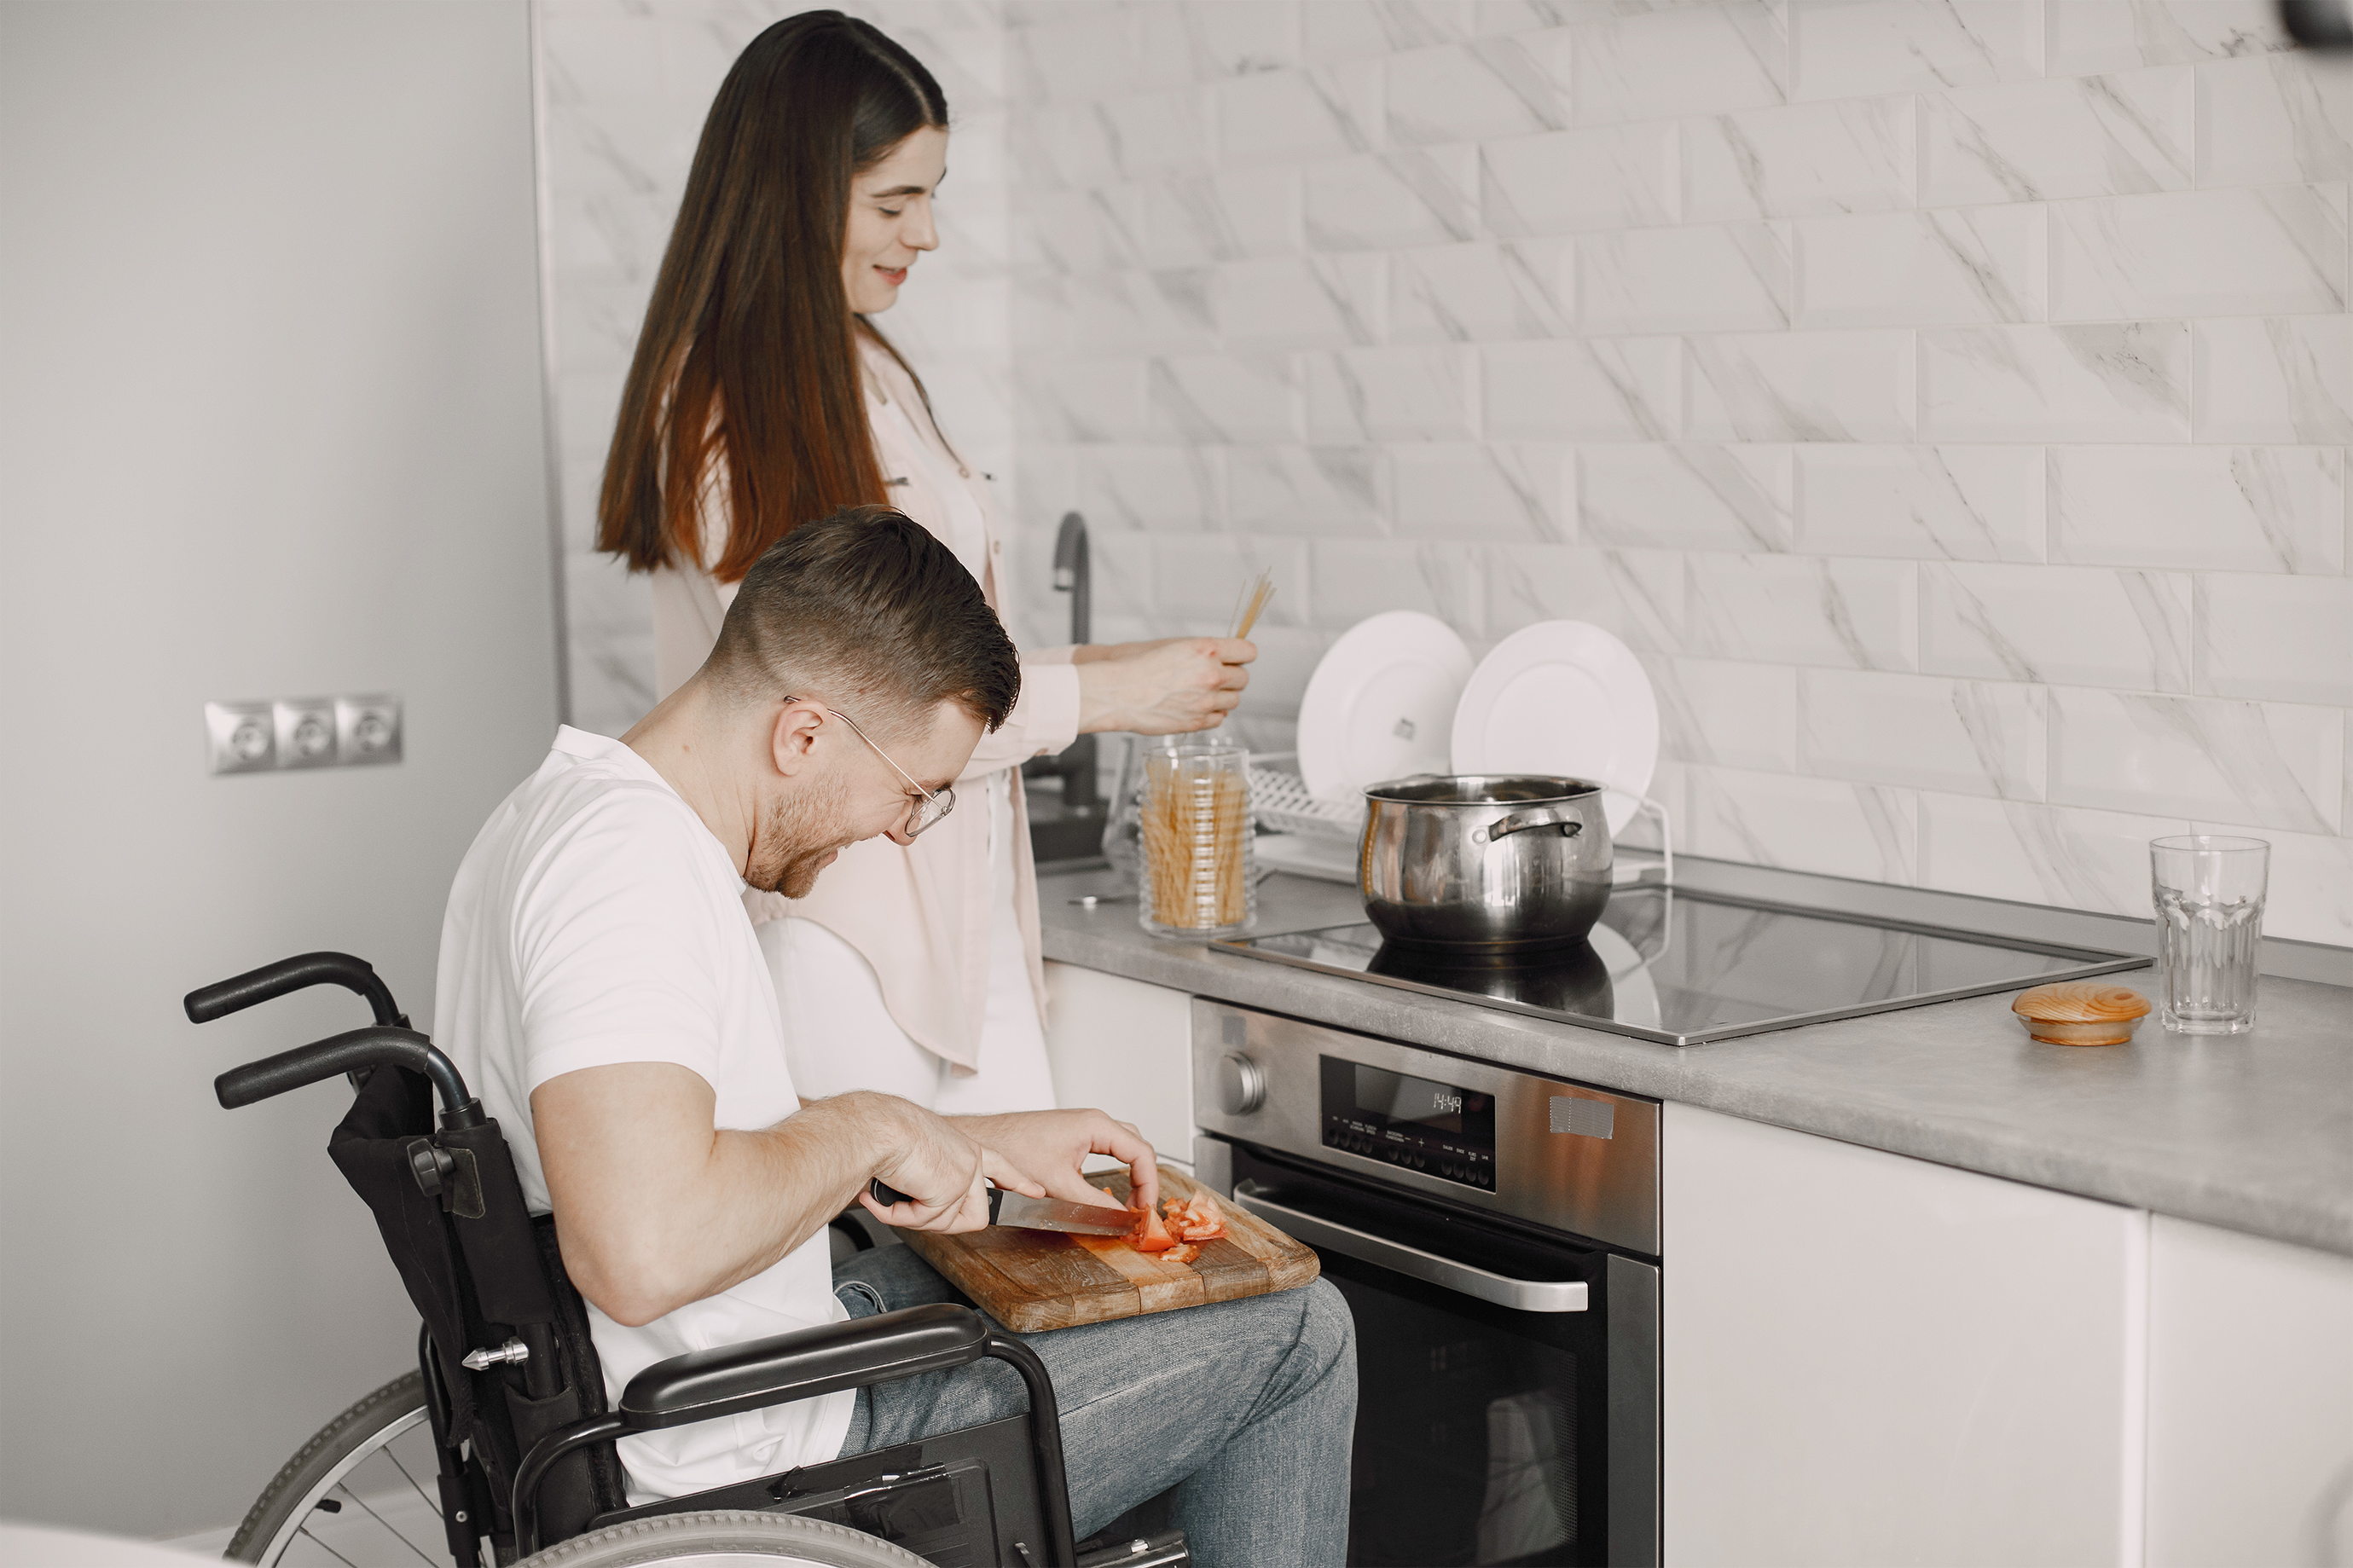 Man in a wheelchair cooking in an accessible kitchen with a woman.